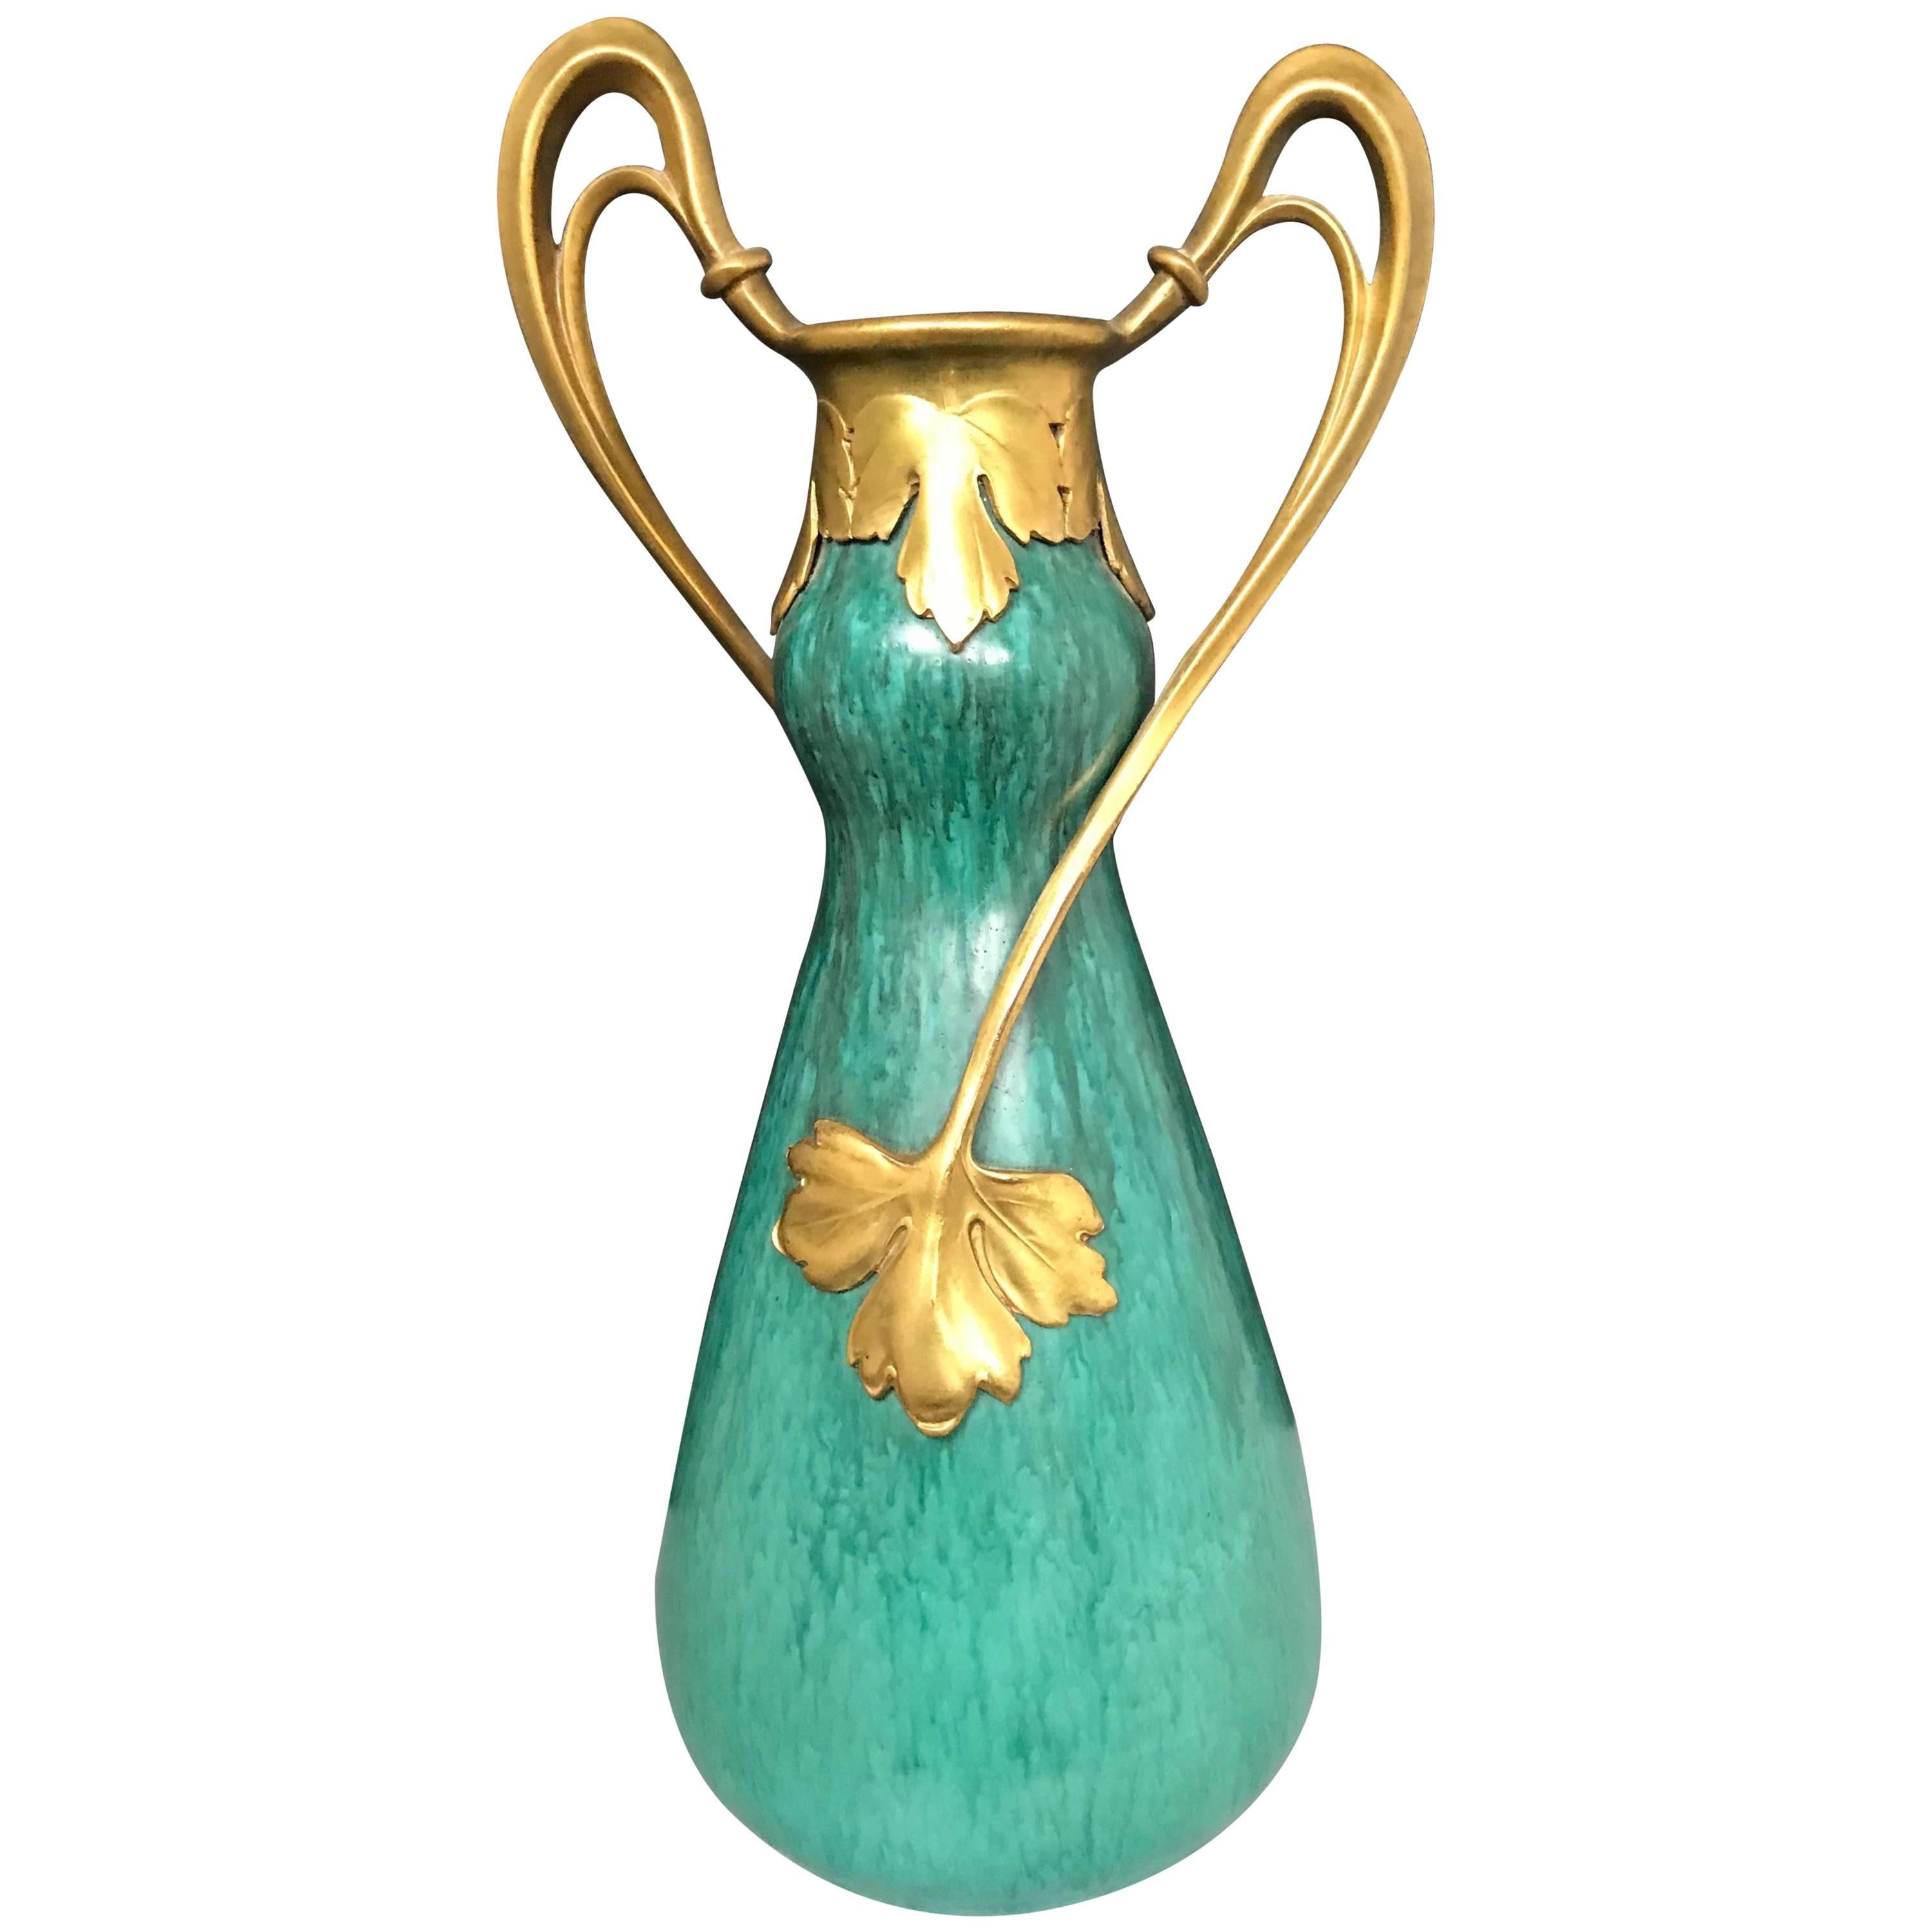 Striking Art Nouveau Ceramic and Bronze-Mounted Vase in Victor Horta Style For Sale